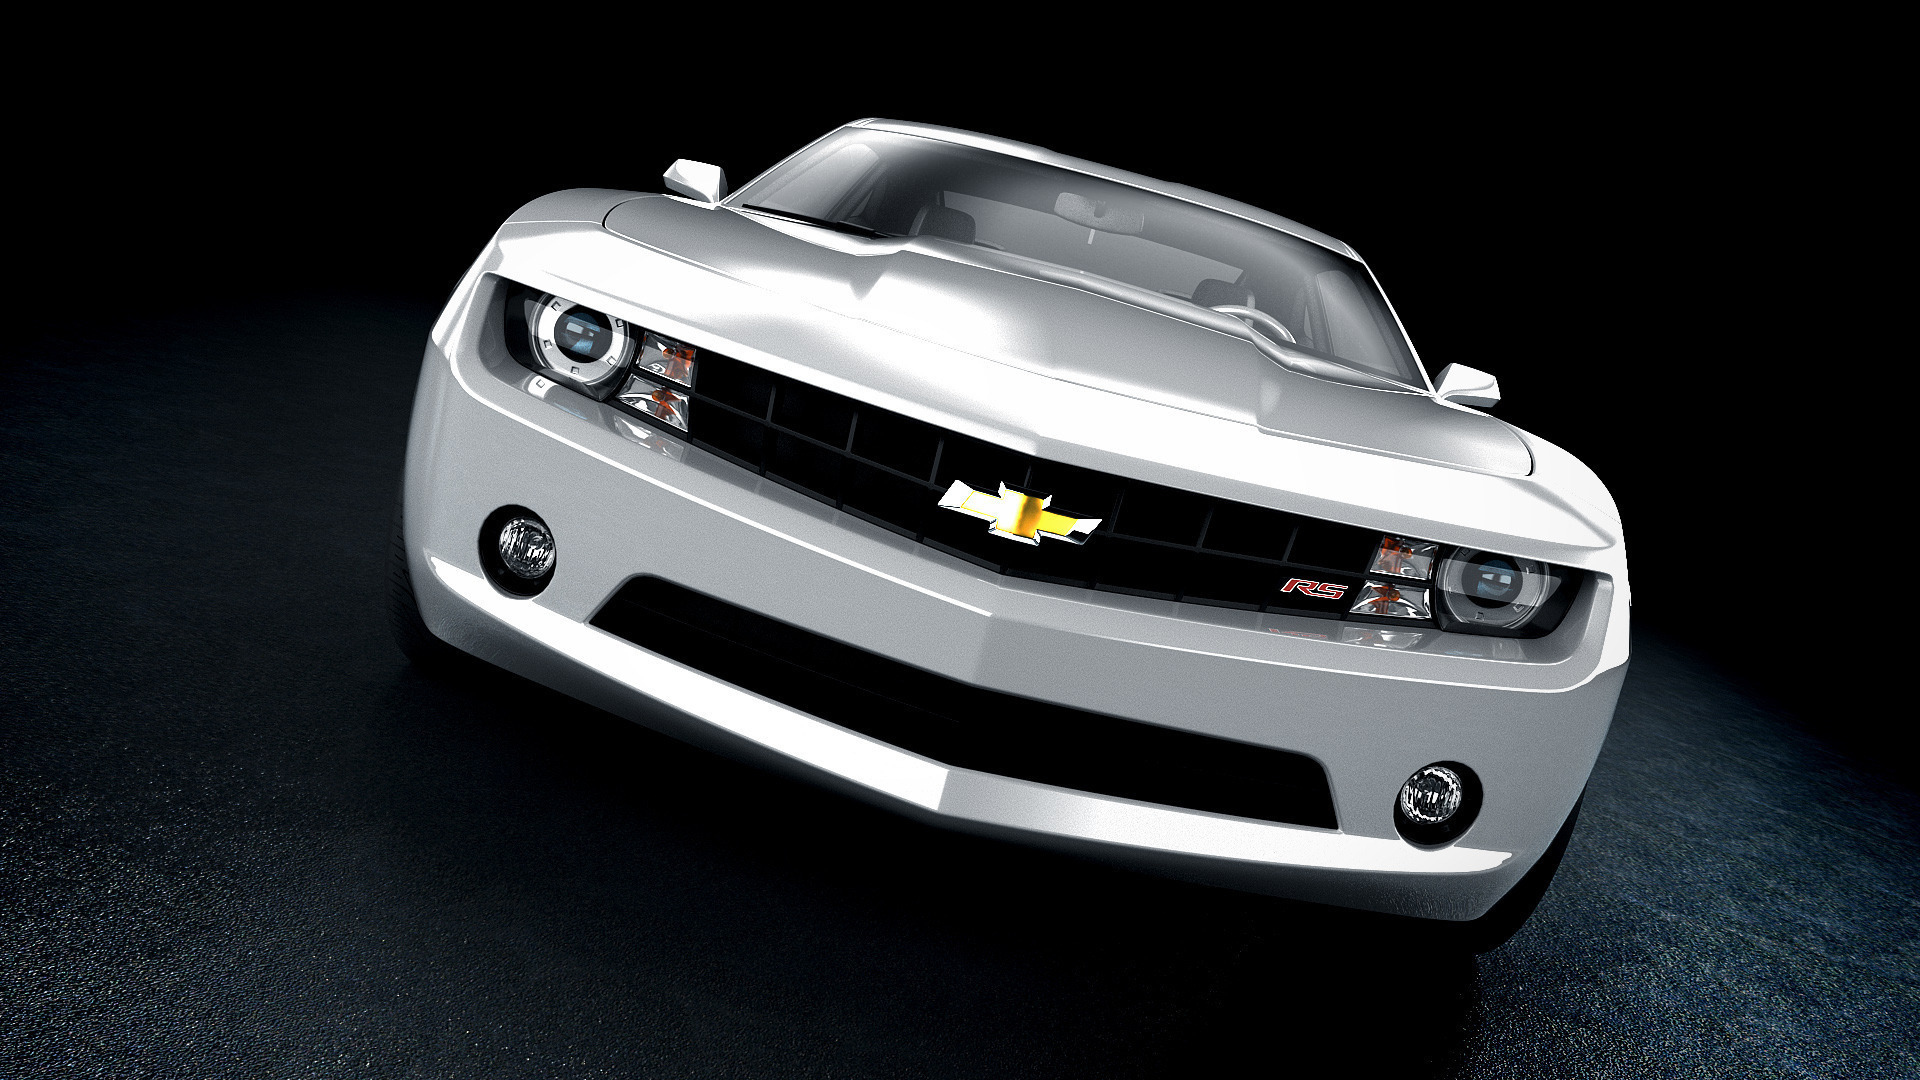 The rebellious chevrolet camaro in an eyecatching black and white color  design 2K wallpaper download